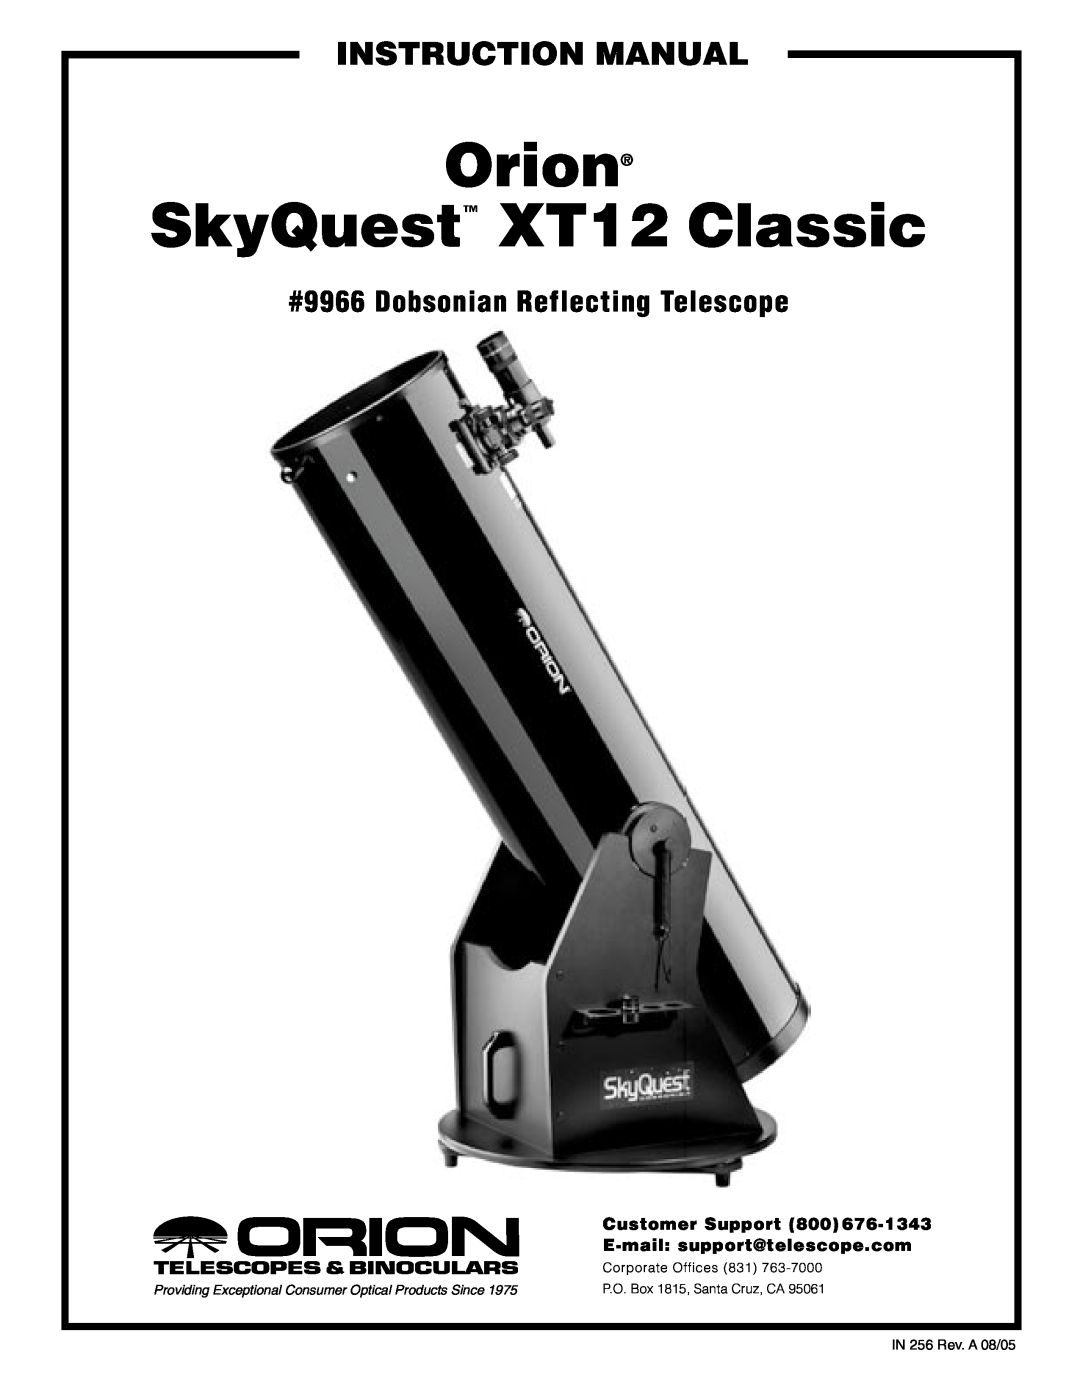 Orion instruction manual #9966 Dobsonian Reflecting Telescope, Orion SkyQuest XT12 Classic, Customer Support 